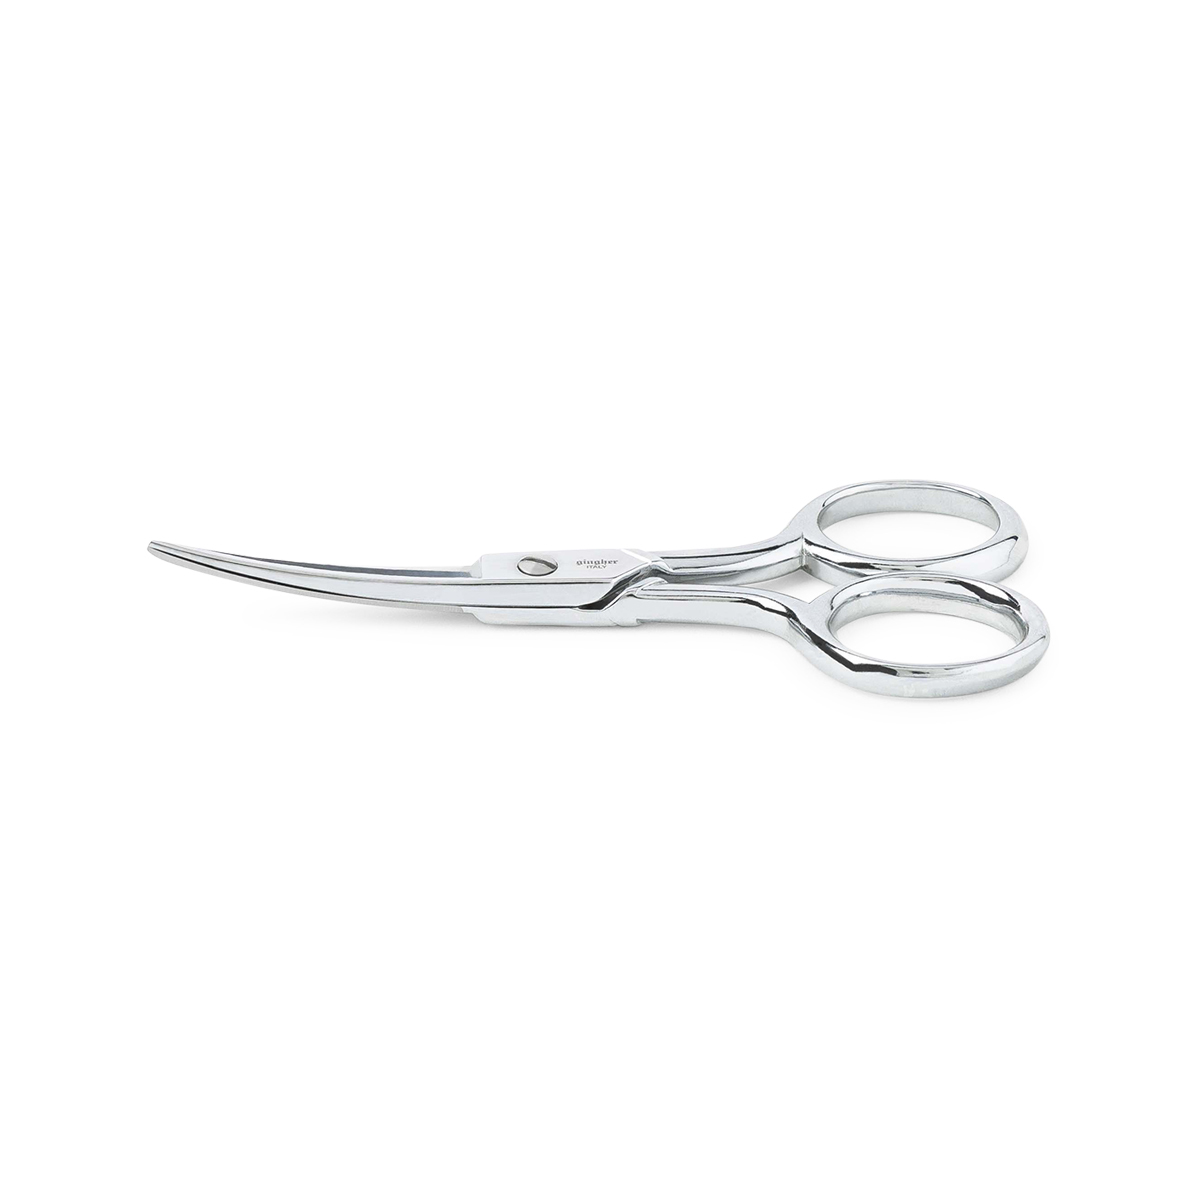 427-4curv 4″ Classic Forged Curved Embroidery Scissors